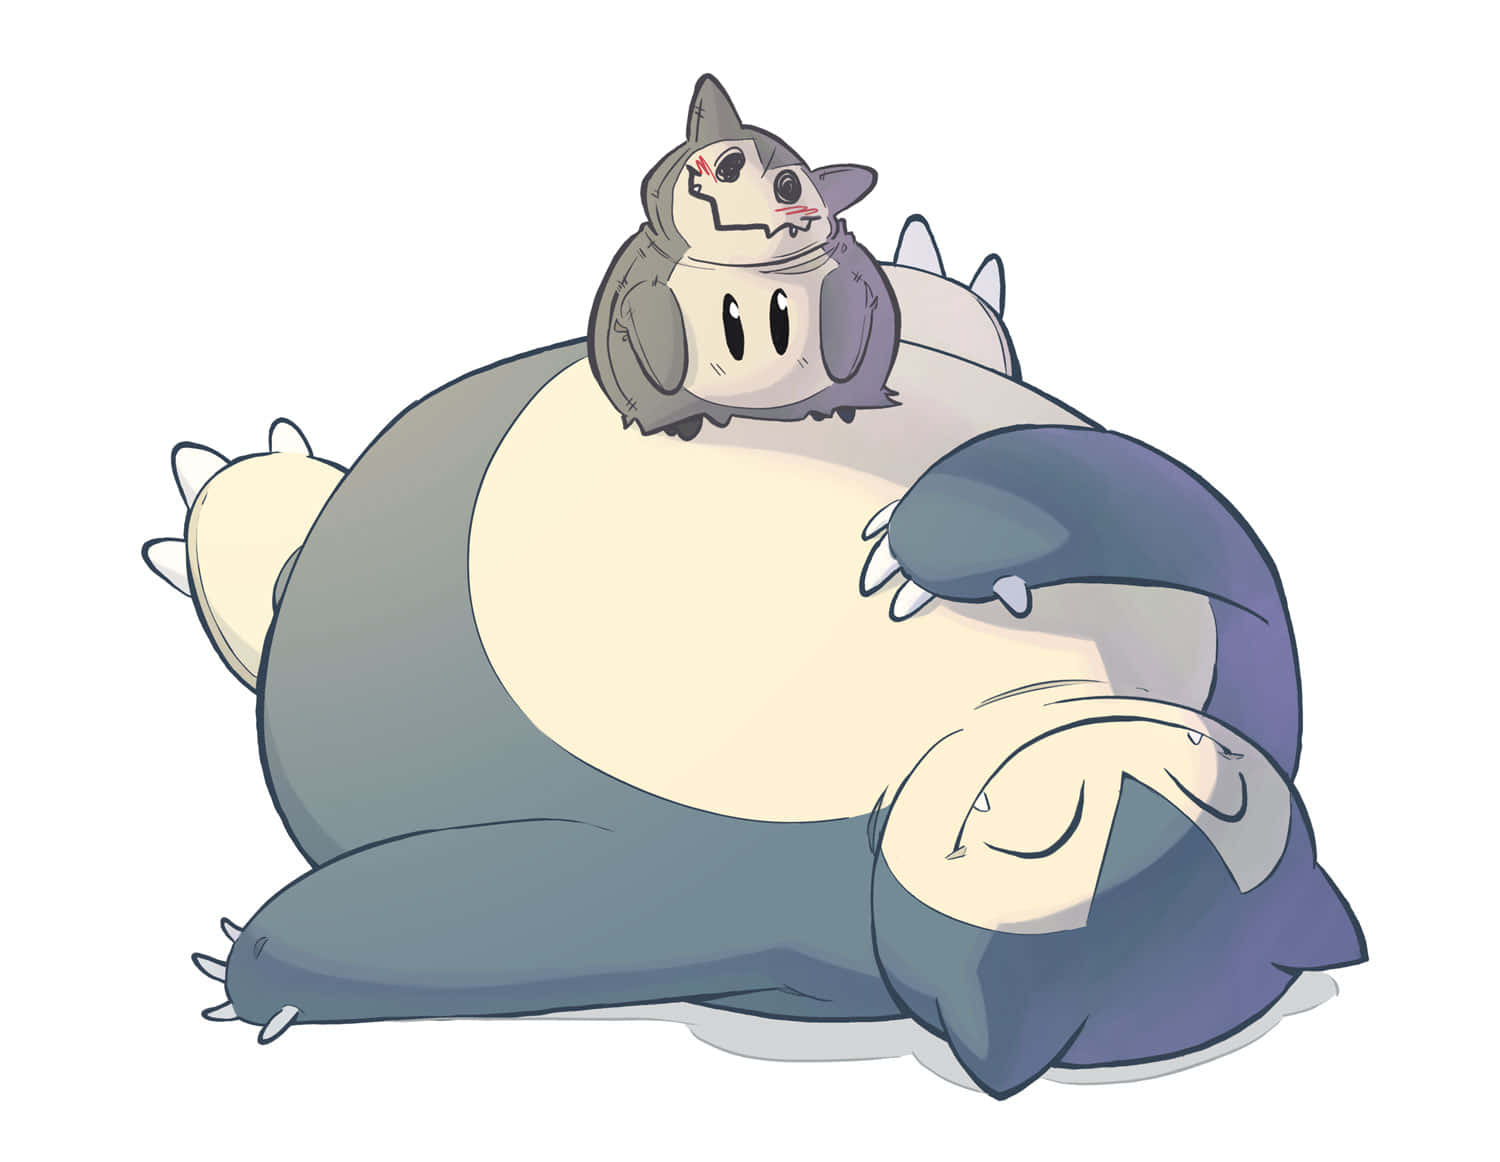 Take a break with Snorlax!